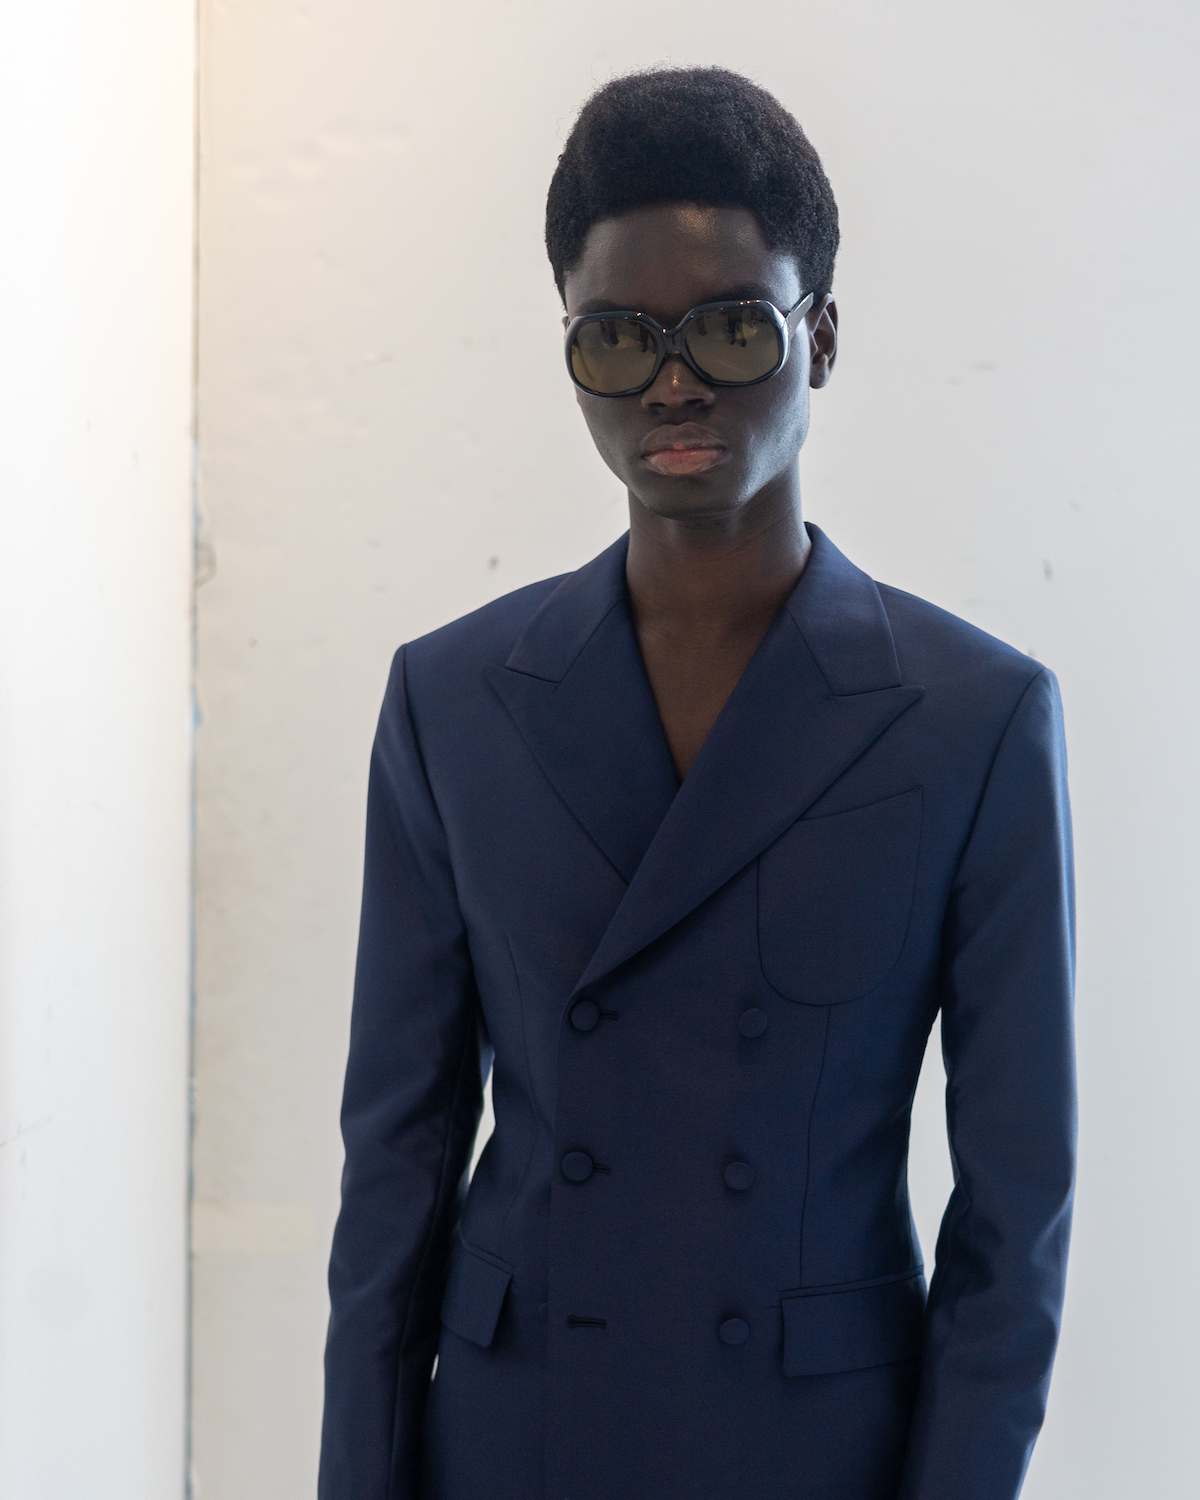 A model wearing black sunglasses and a navy suit stands in a white showroom. The model is wearing clothes from B.M.C.